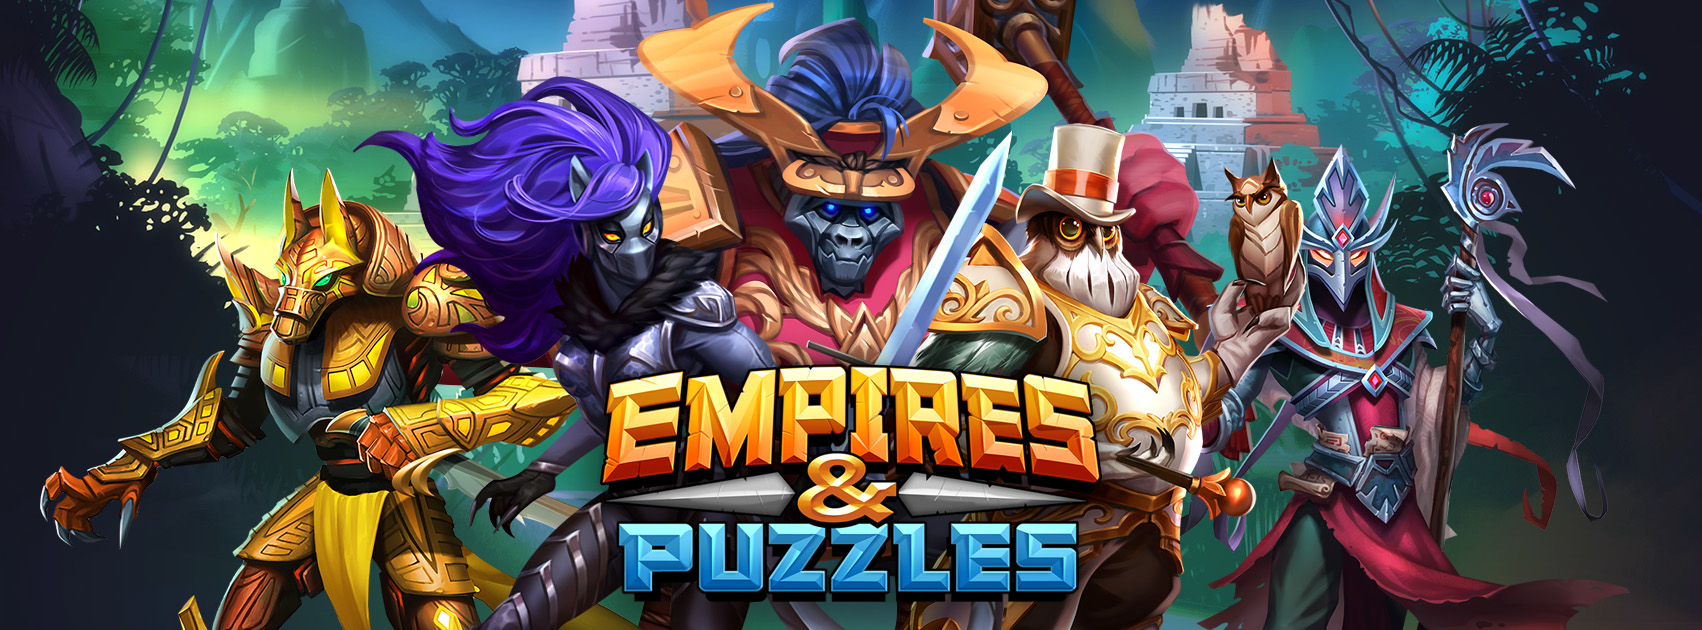 hero academy empires and puzzles